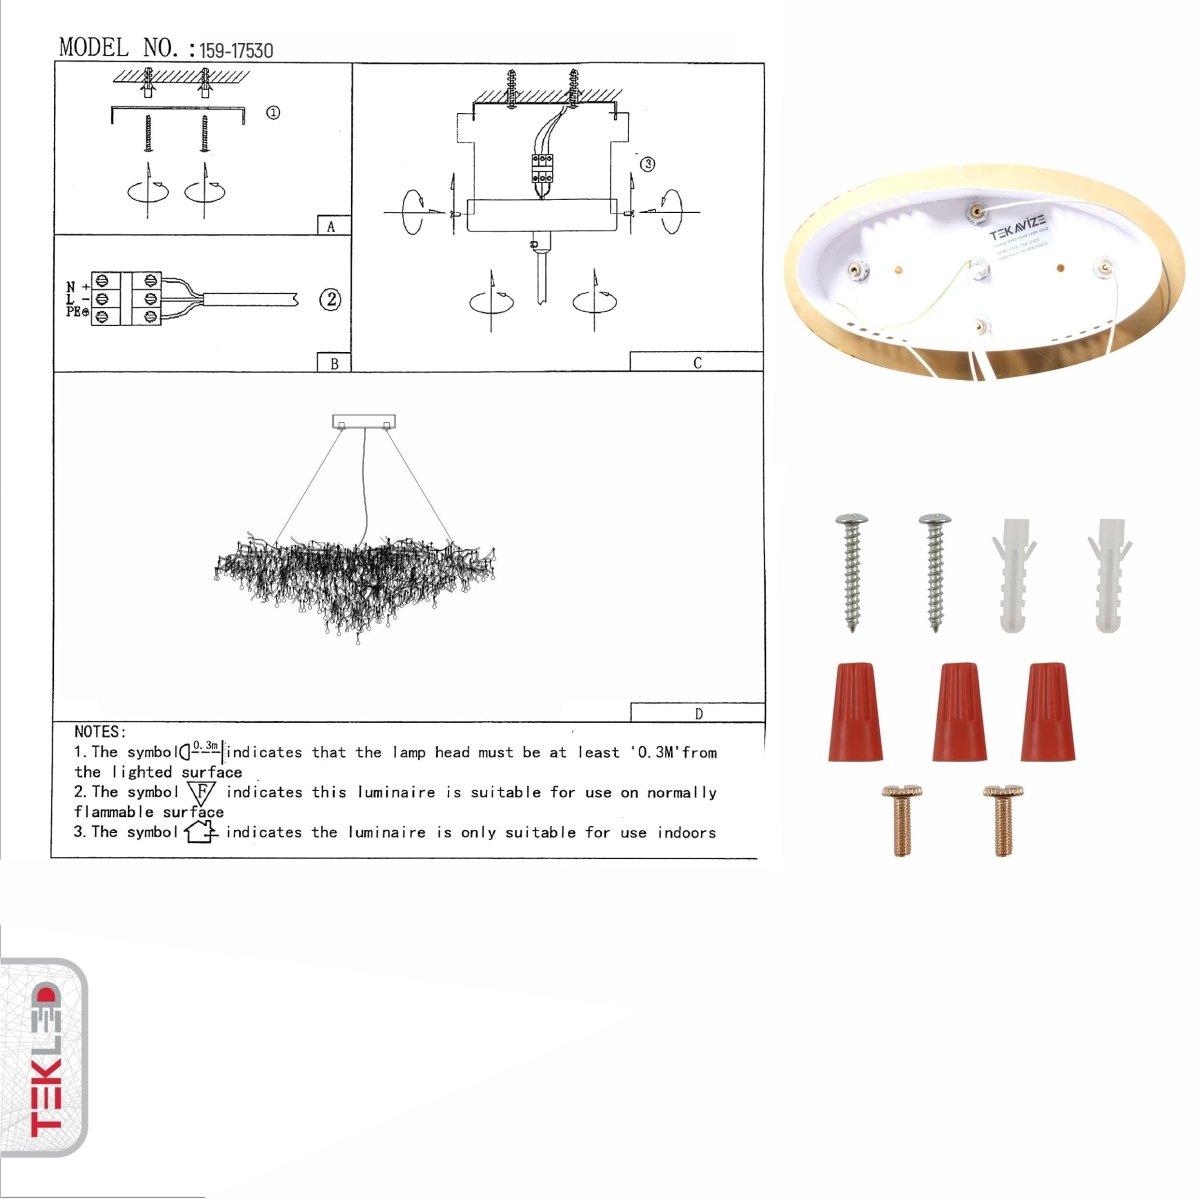 User manual for Modern Crystal Glass Droplet Chandelier with 13xG9 Fittings 1200mm | TEKLED 159-17530